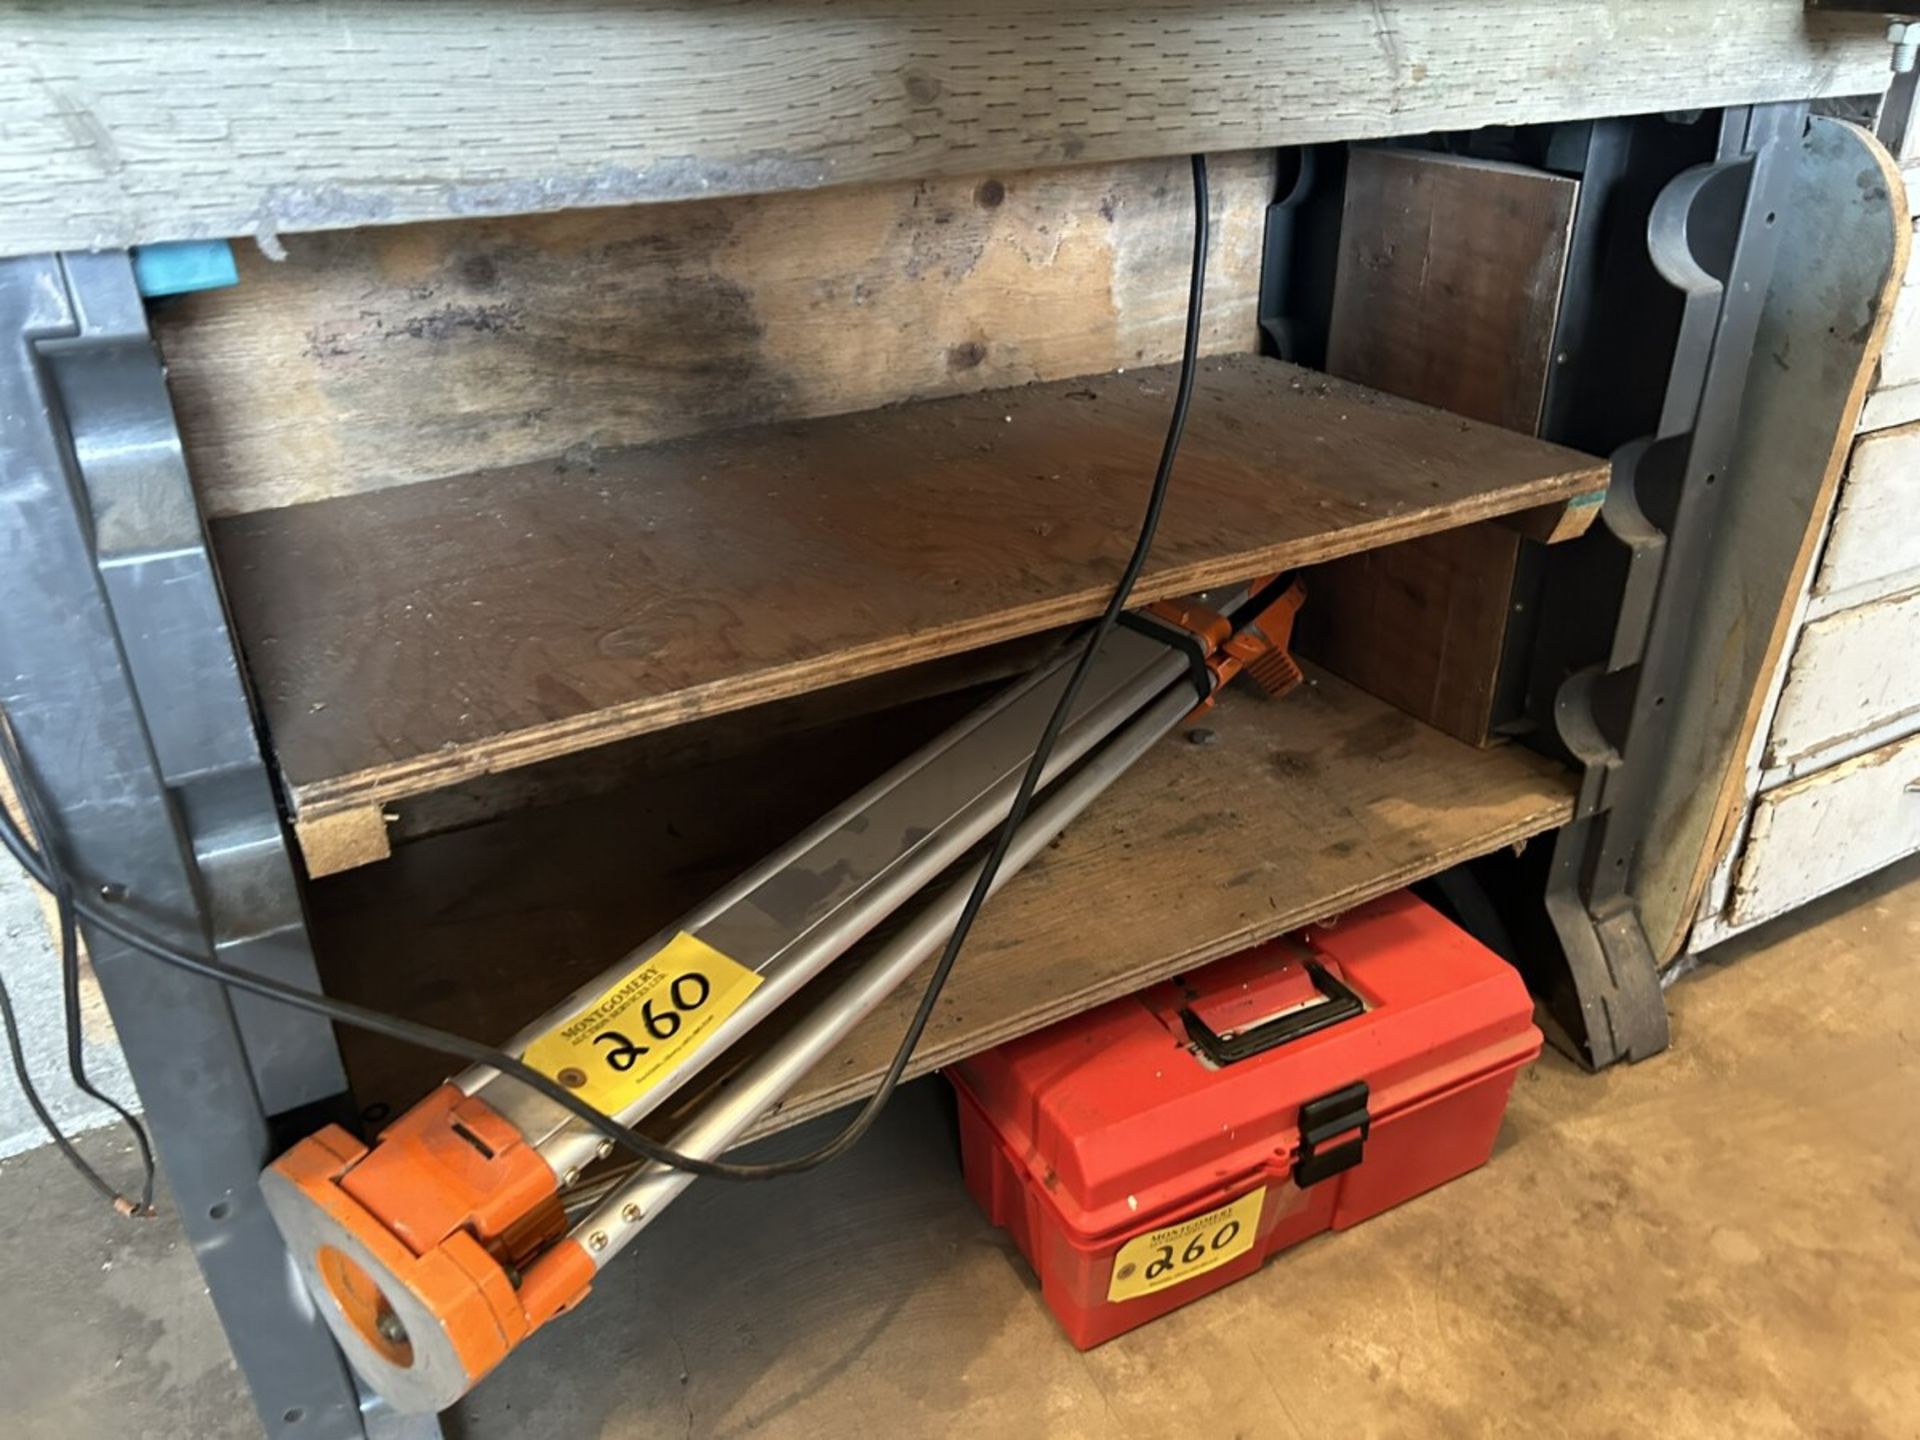 48"X24"X36" WORK BENCH W/ 4" BENCH VISE (POLY STORAGE BINS NOT INCLUDED) - Image 5 of 5